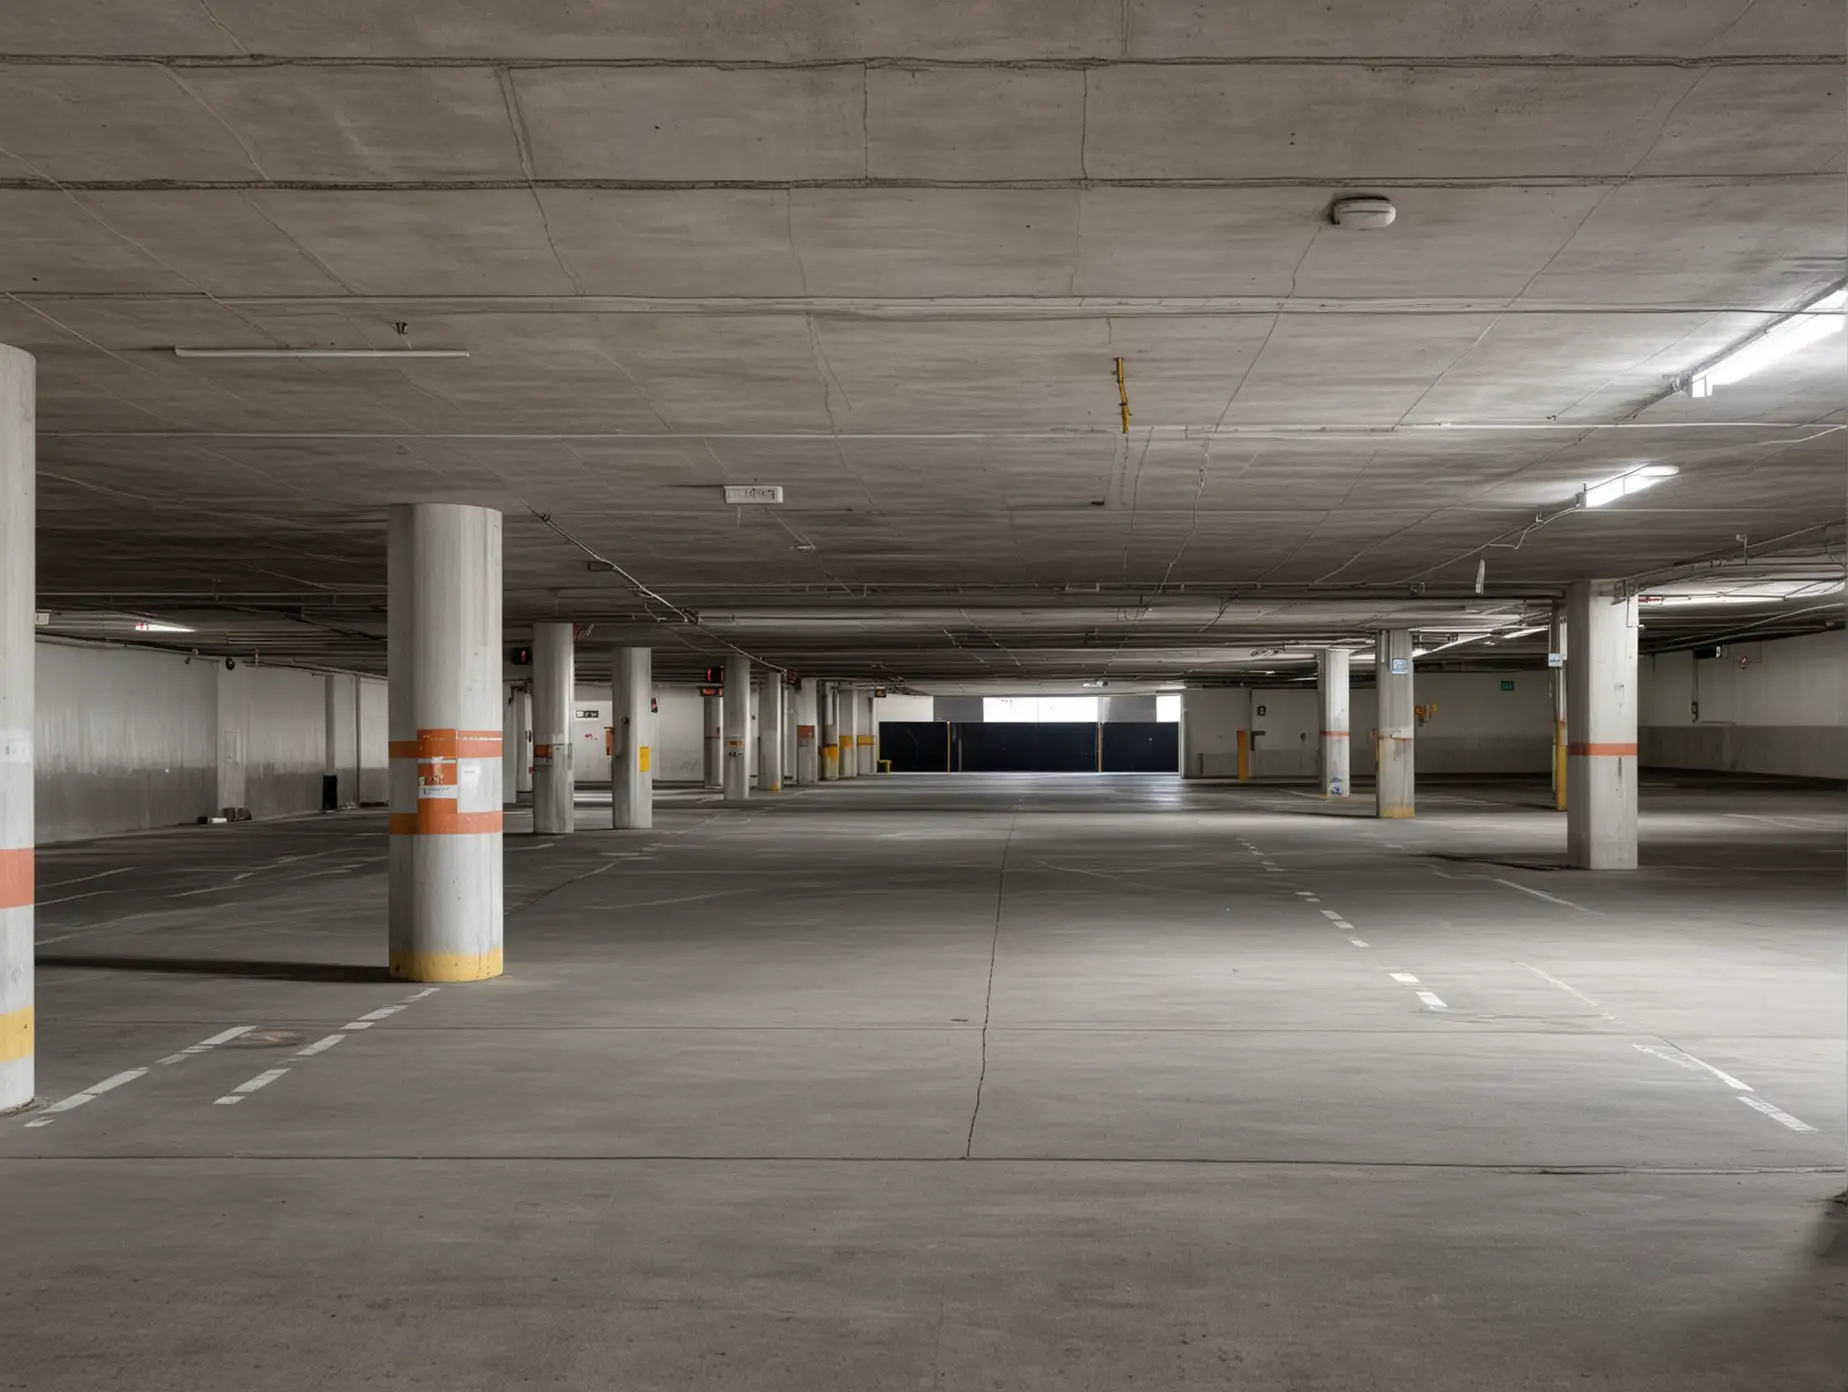 Deserted Parking Garage Spacious and Vacant Urban Structure